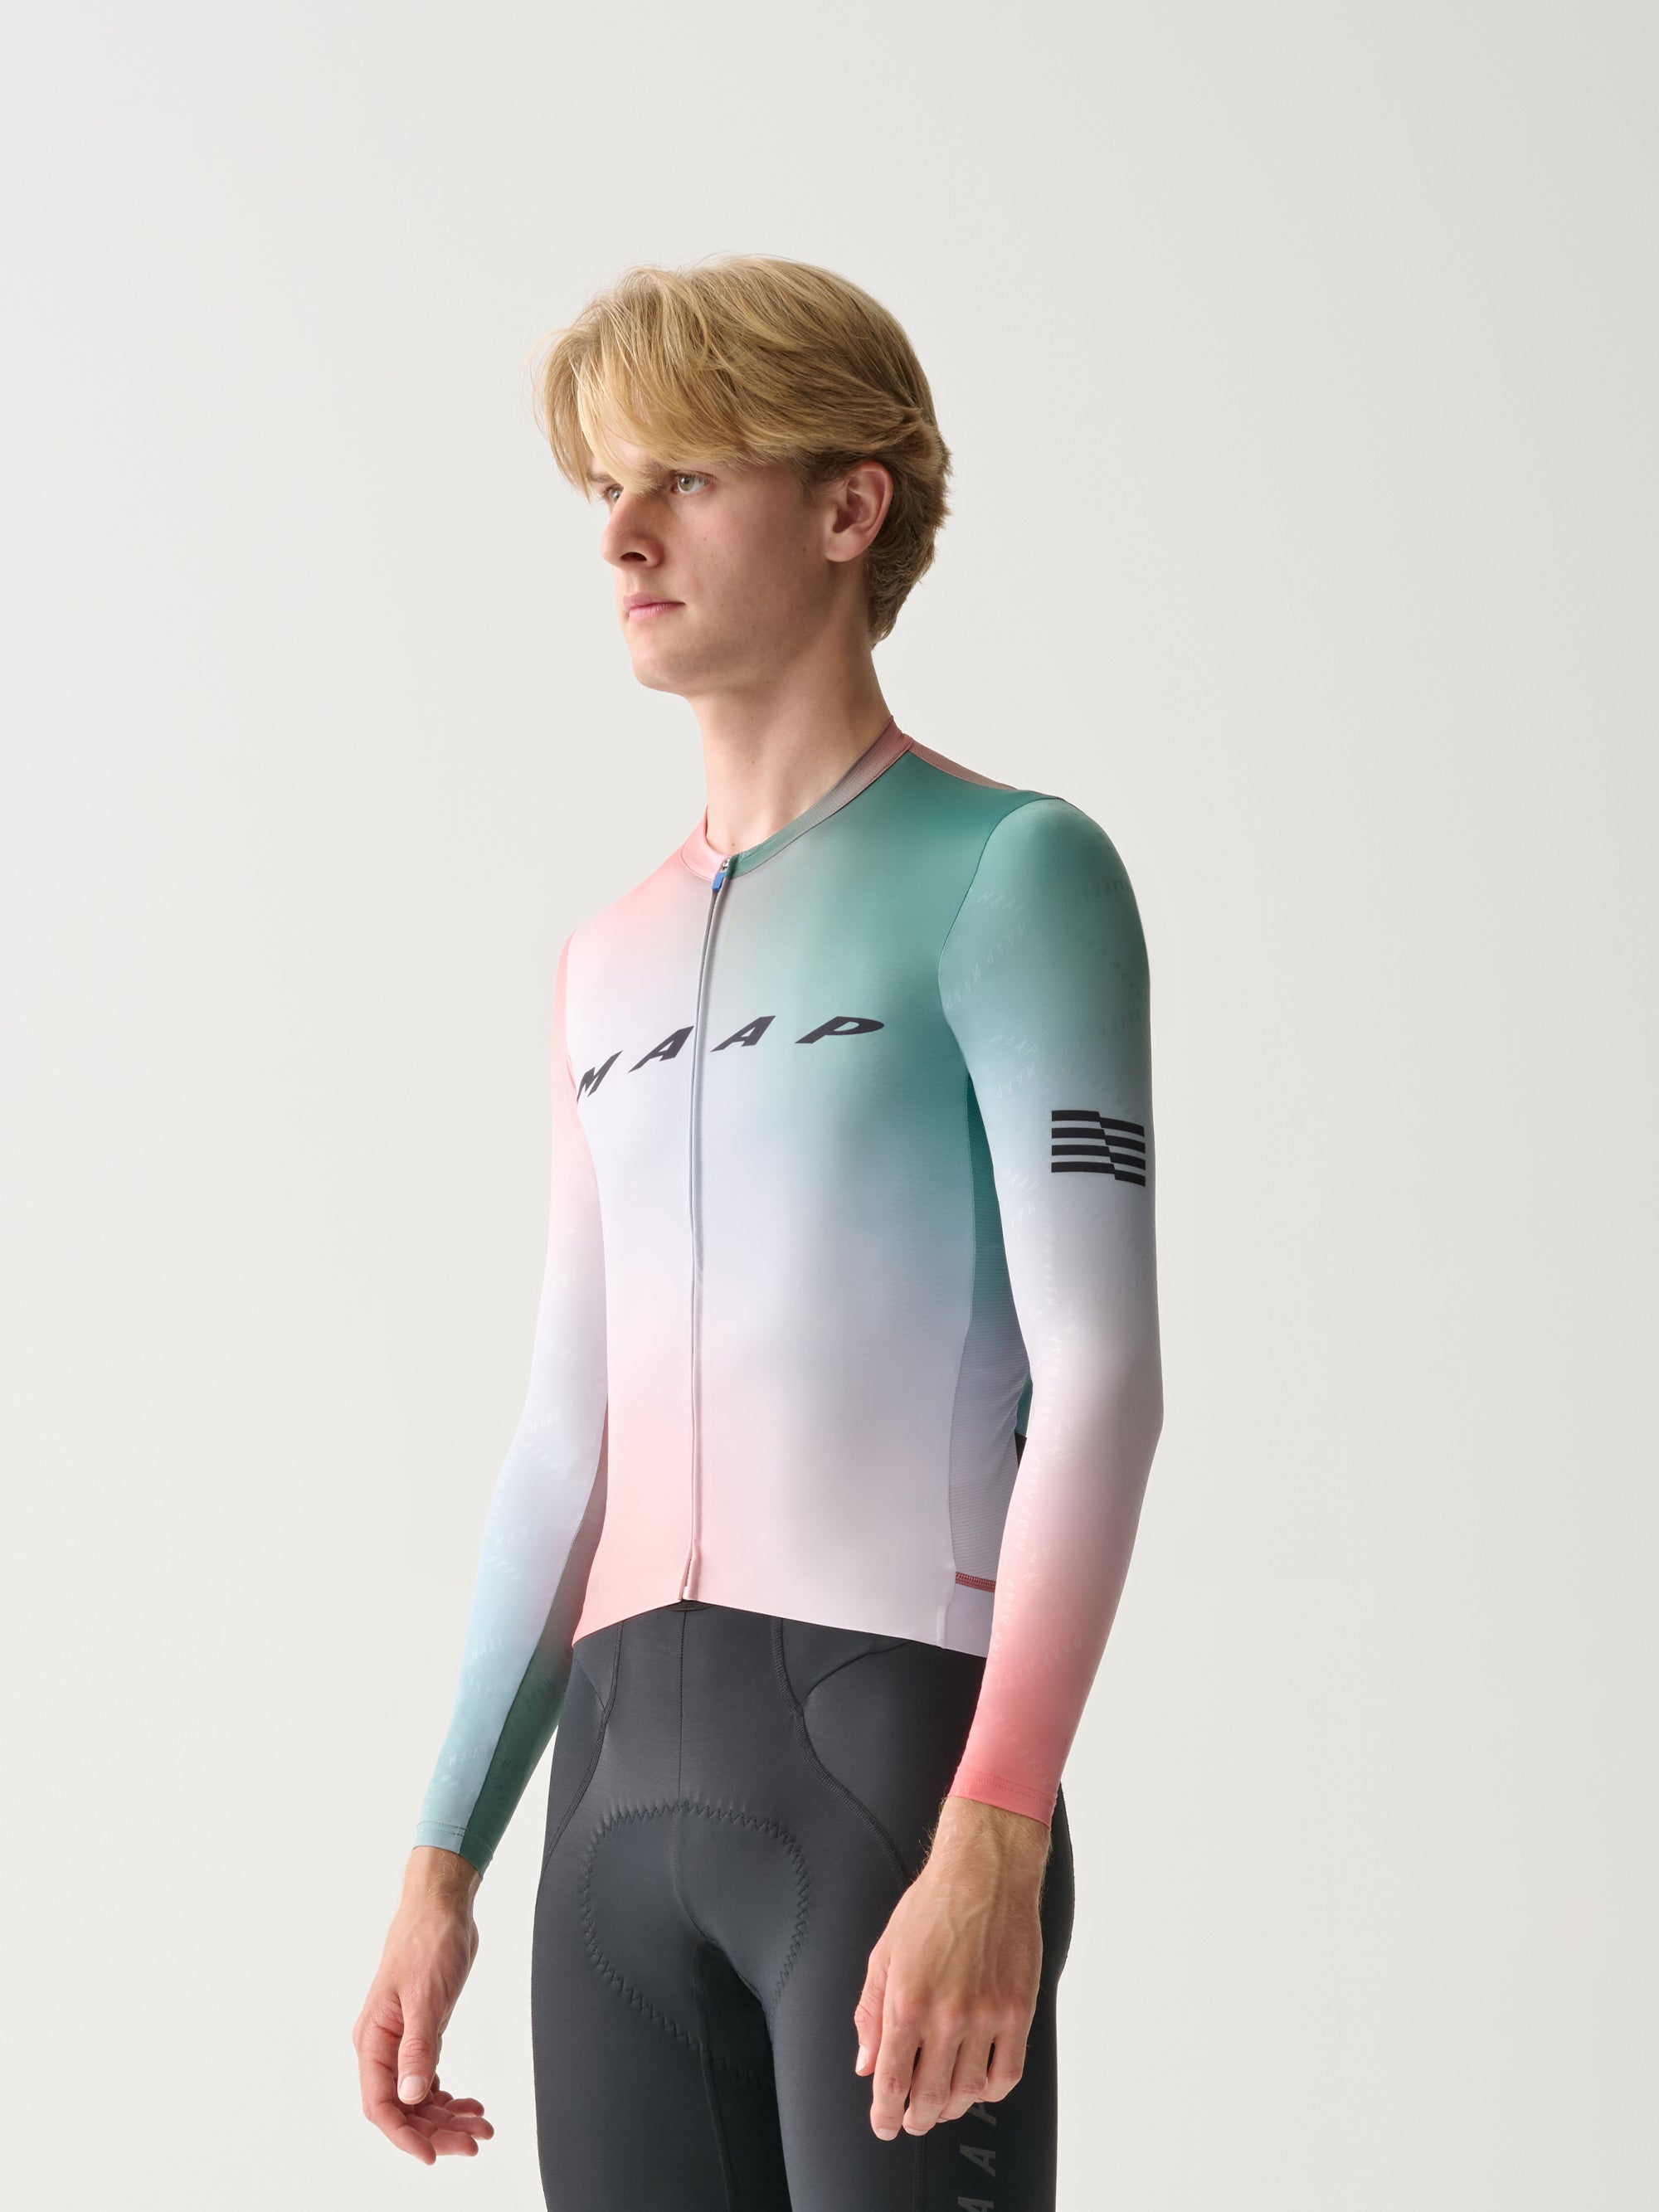 Maillot Pro Hex LS 2.0 - Flamme